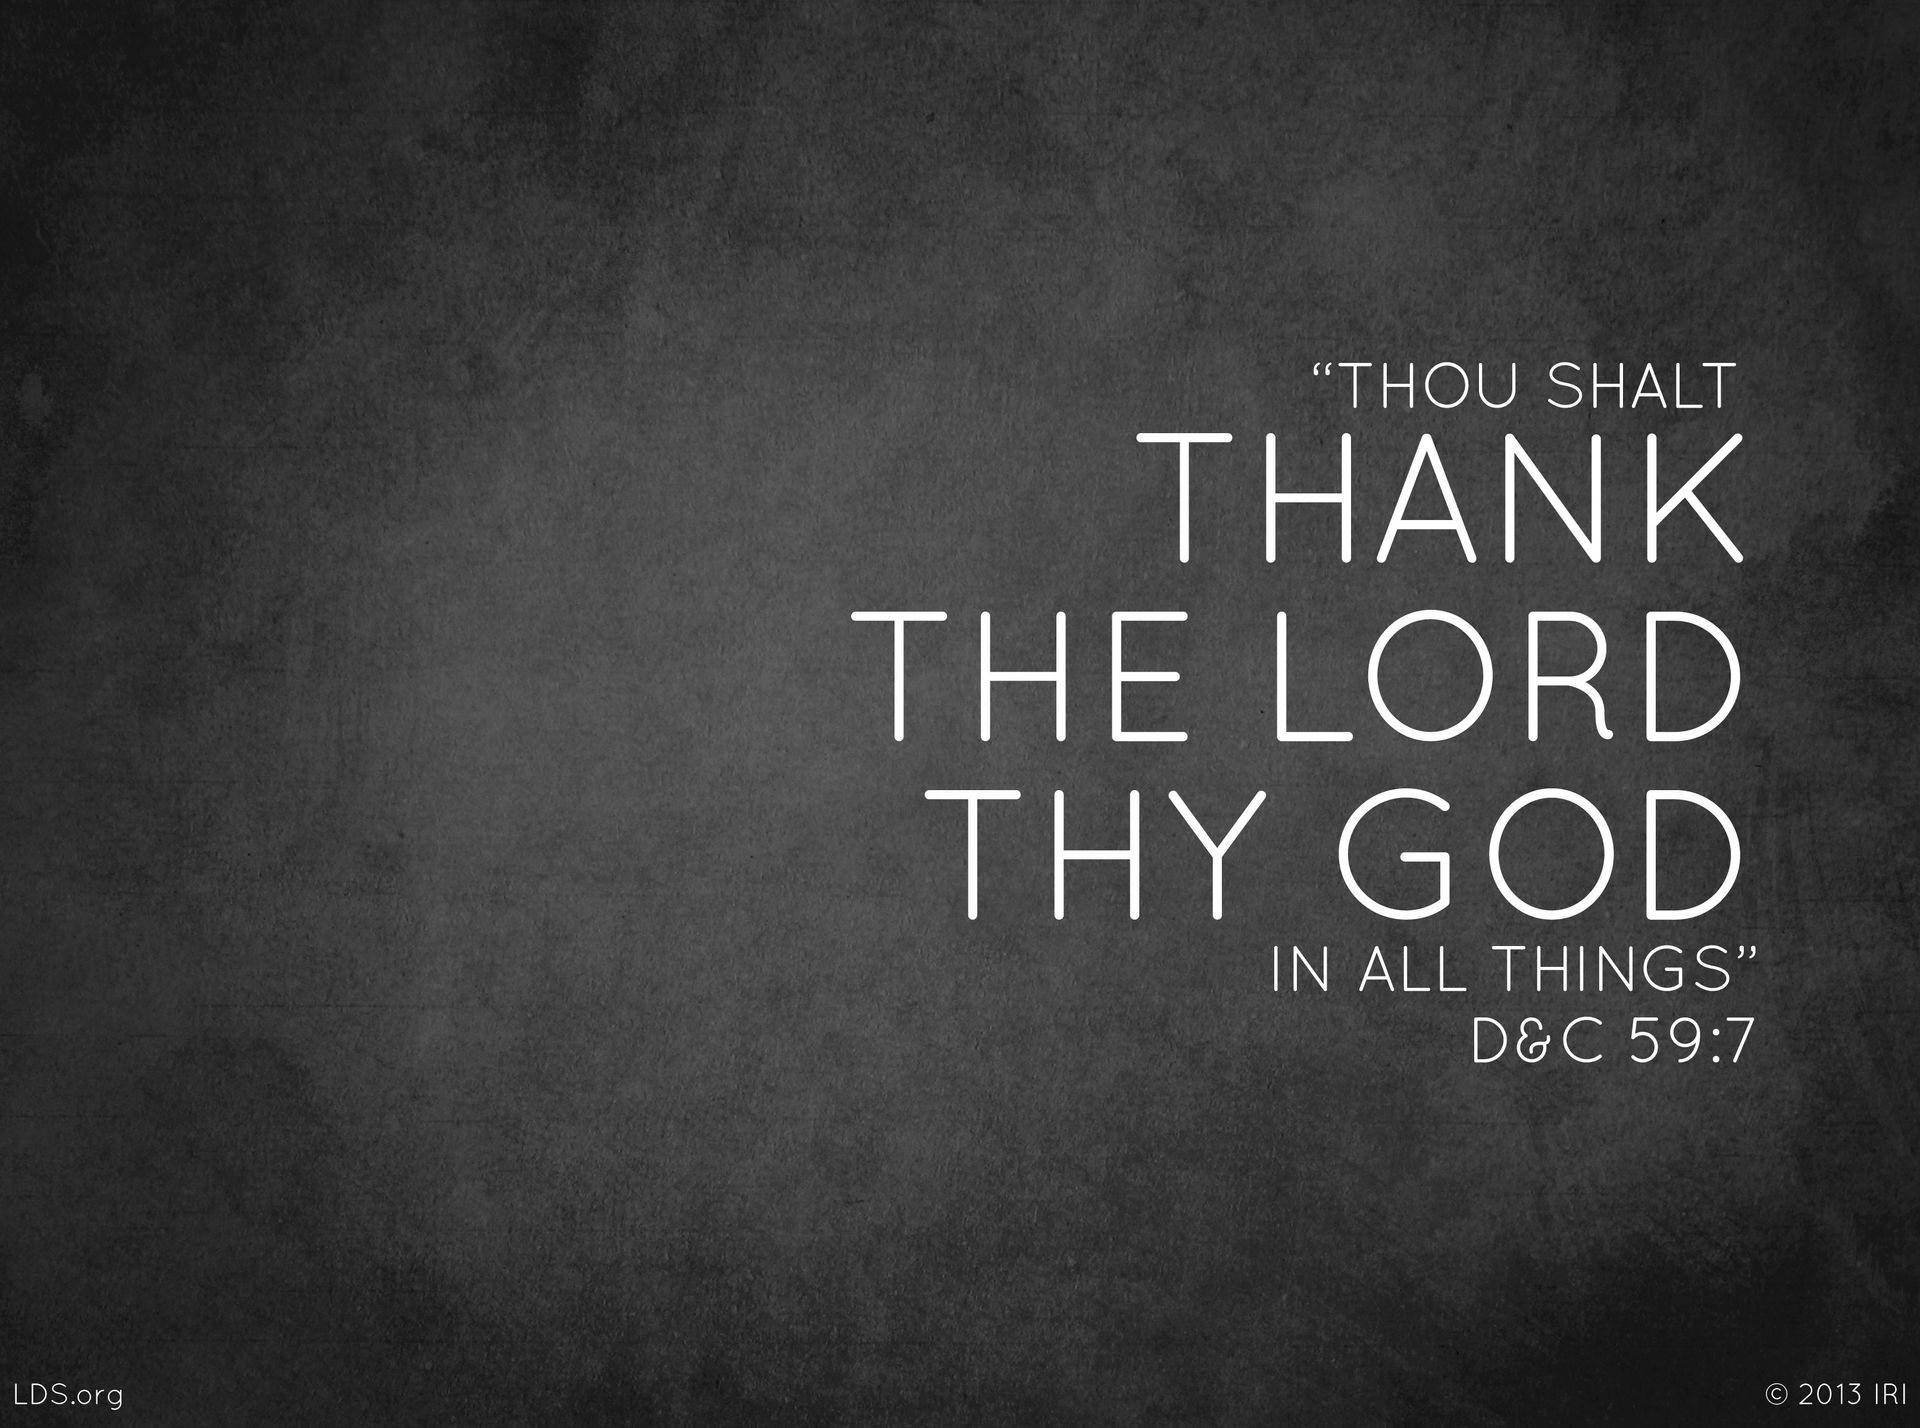 “Thou shalt thank the Lord thy God in all things.”—D&C 59:7